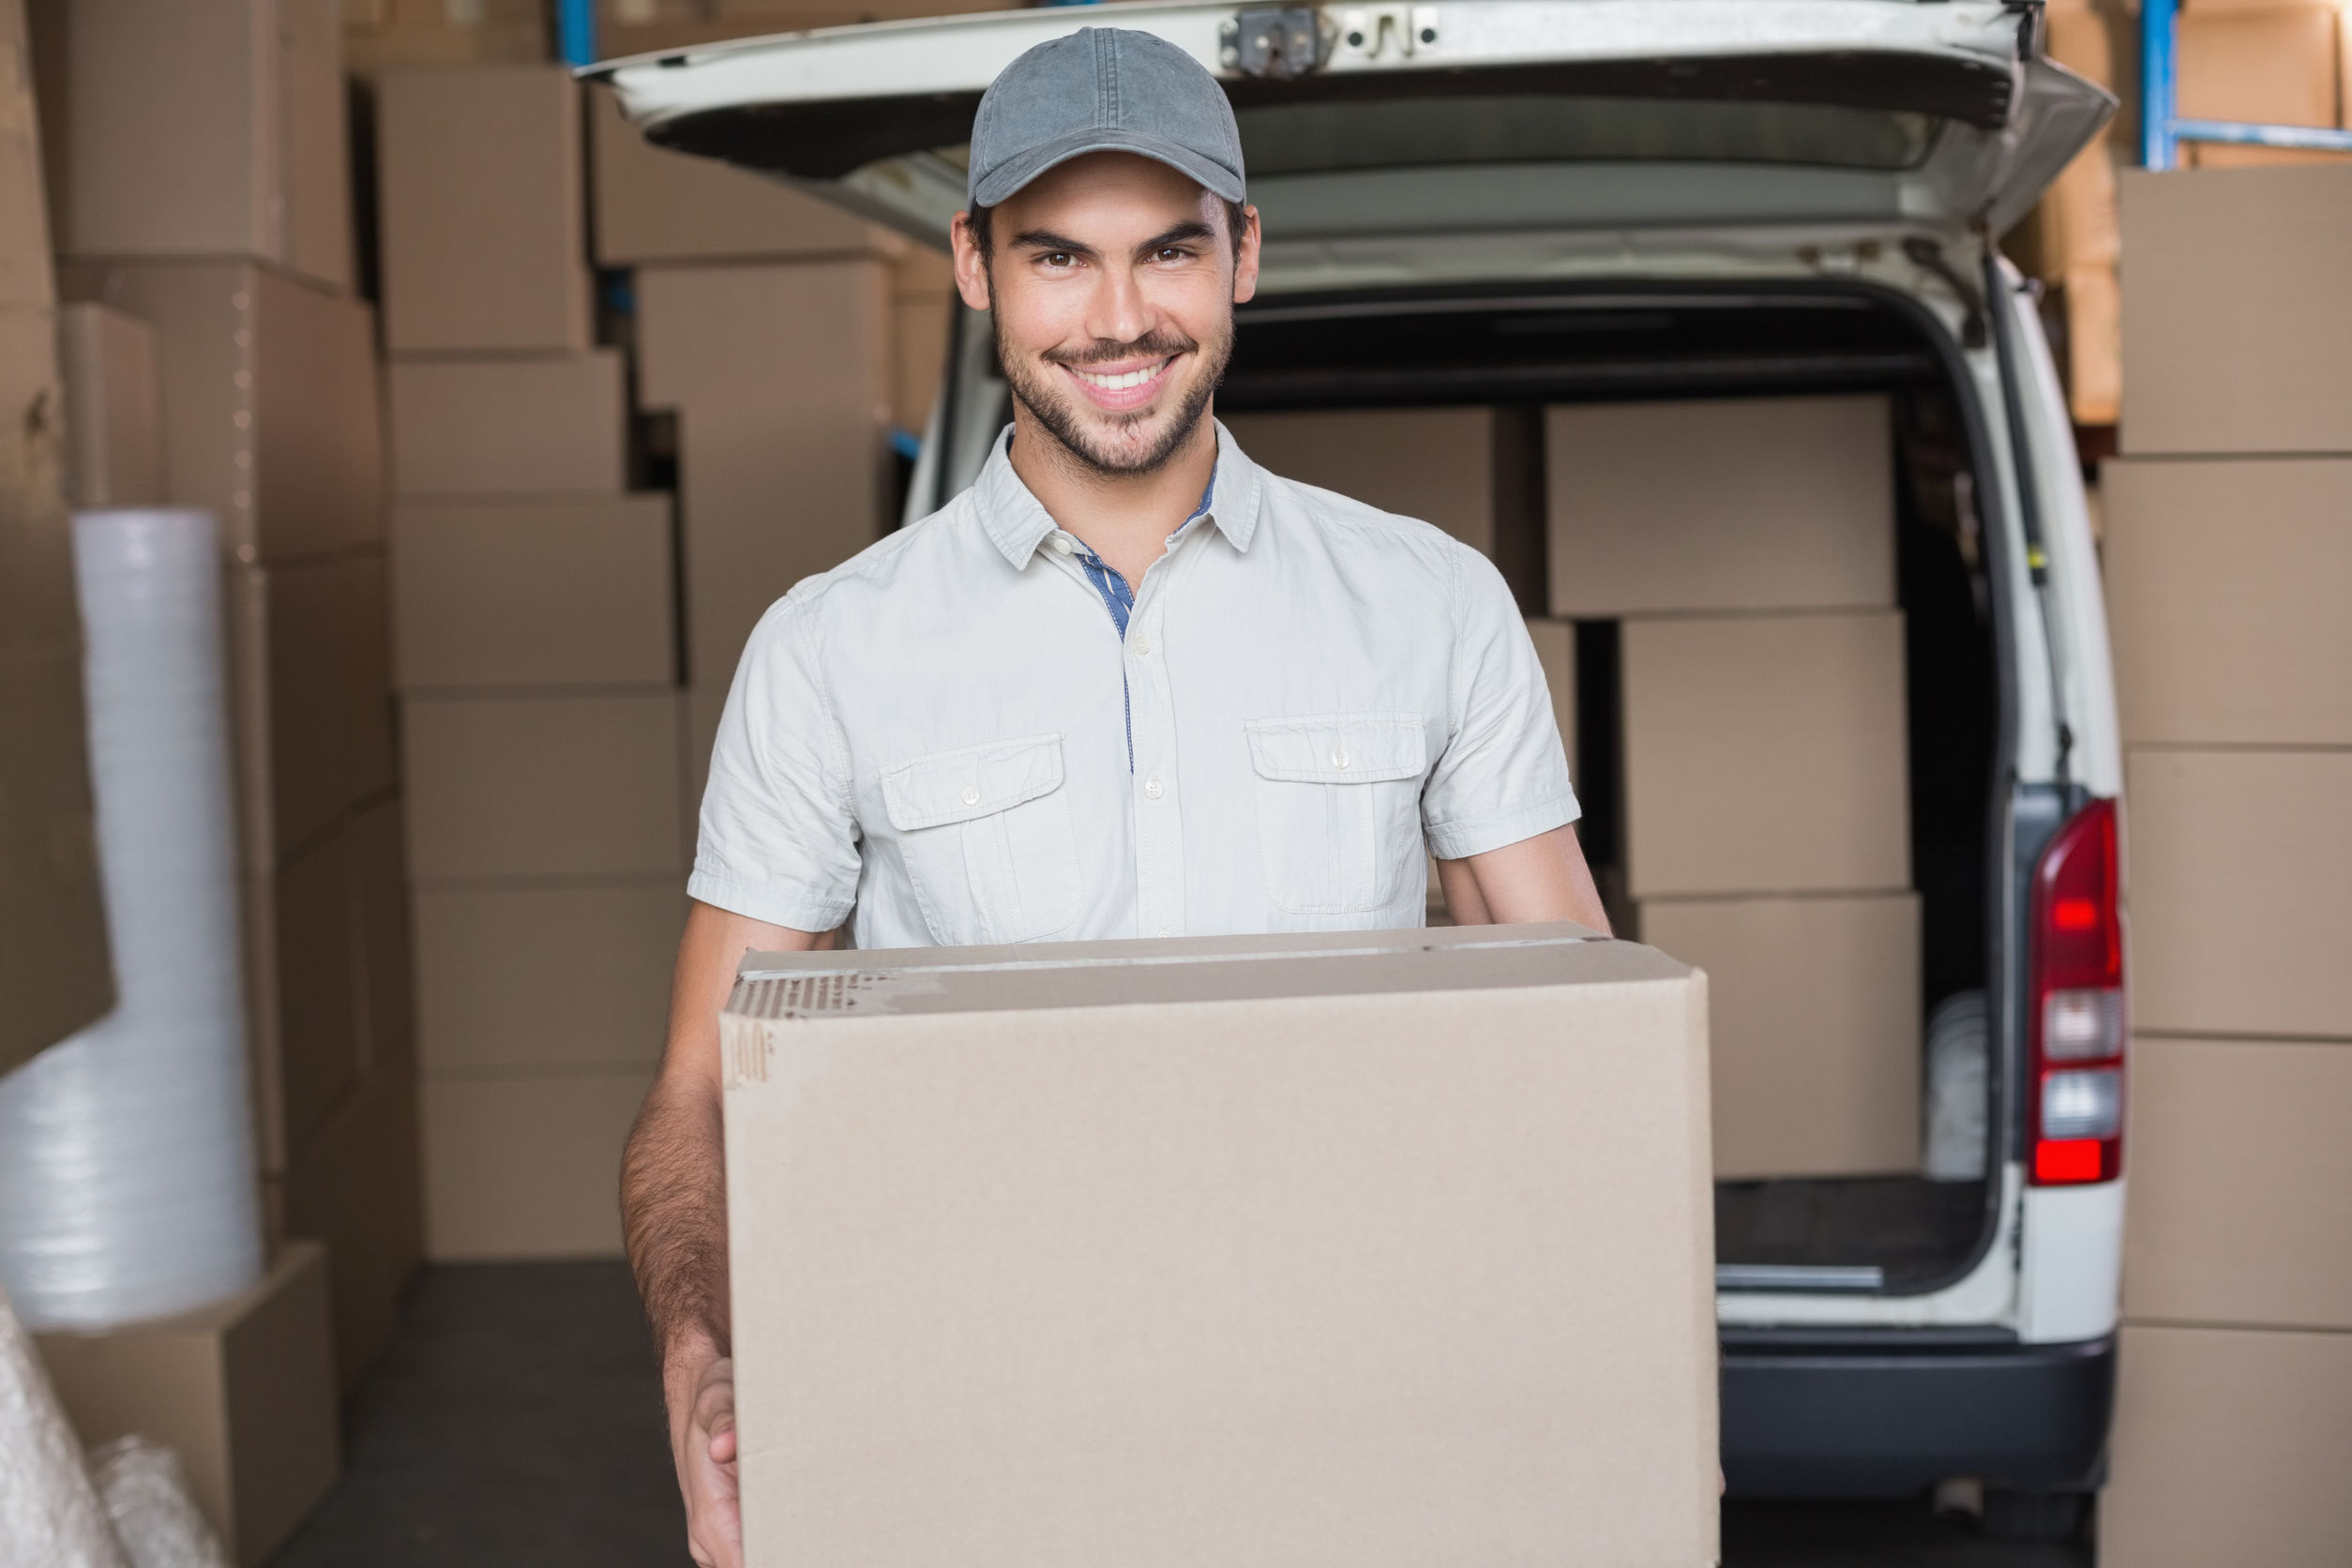 Injury Compensation For Delivery Drivers in Minnesota